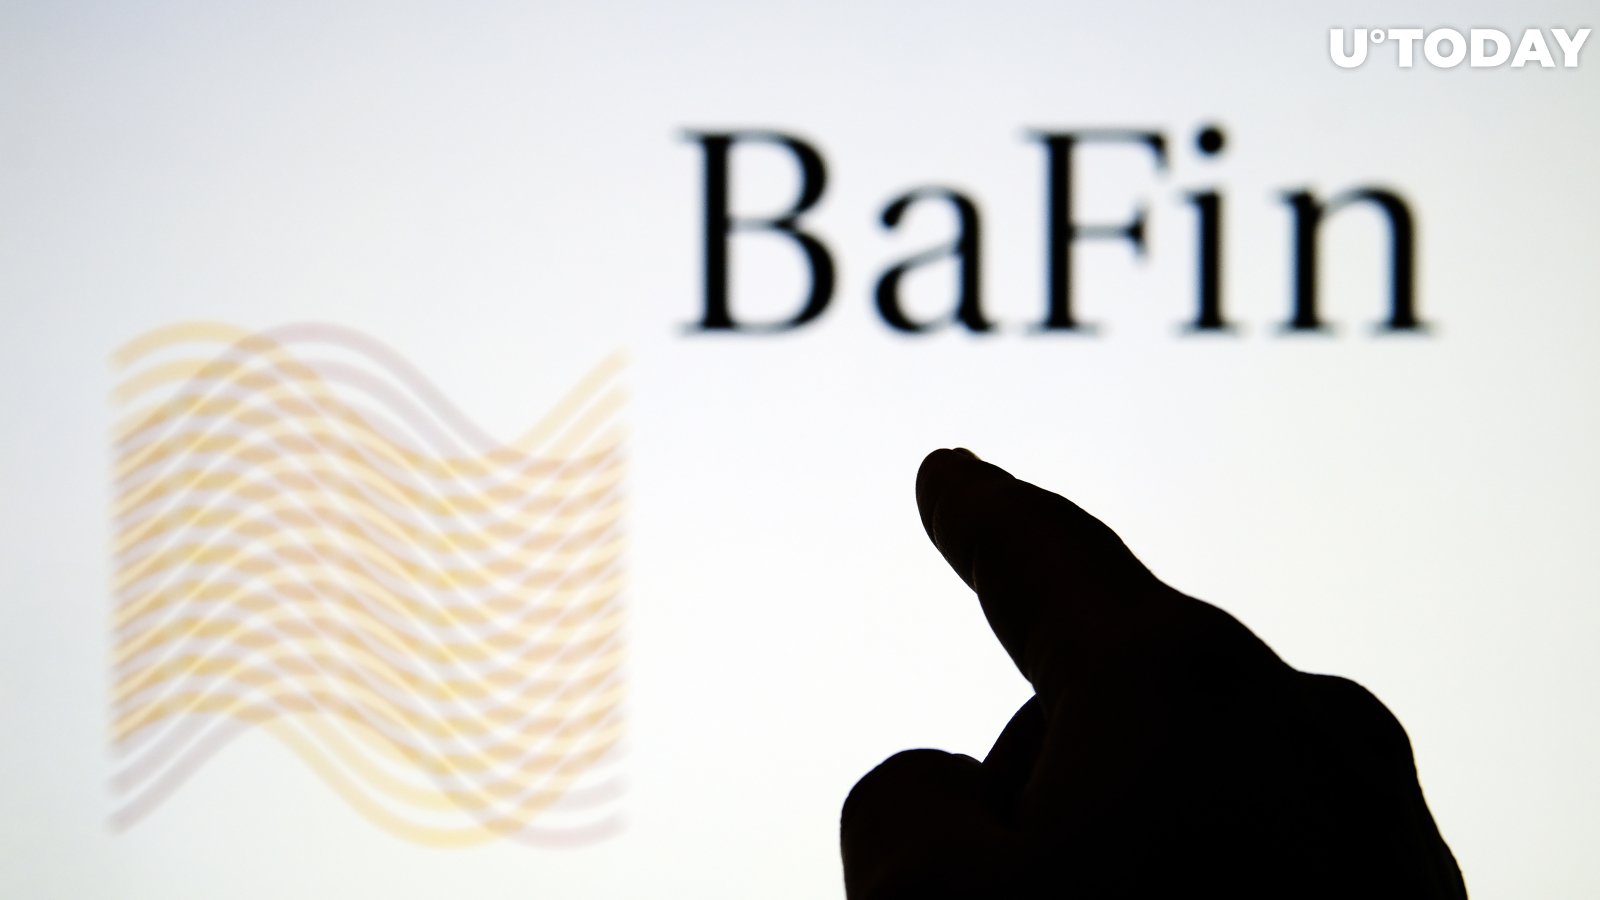 Binance Fails to Remove BaFin's Warning Over Securities Rules Violations